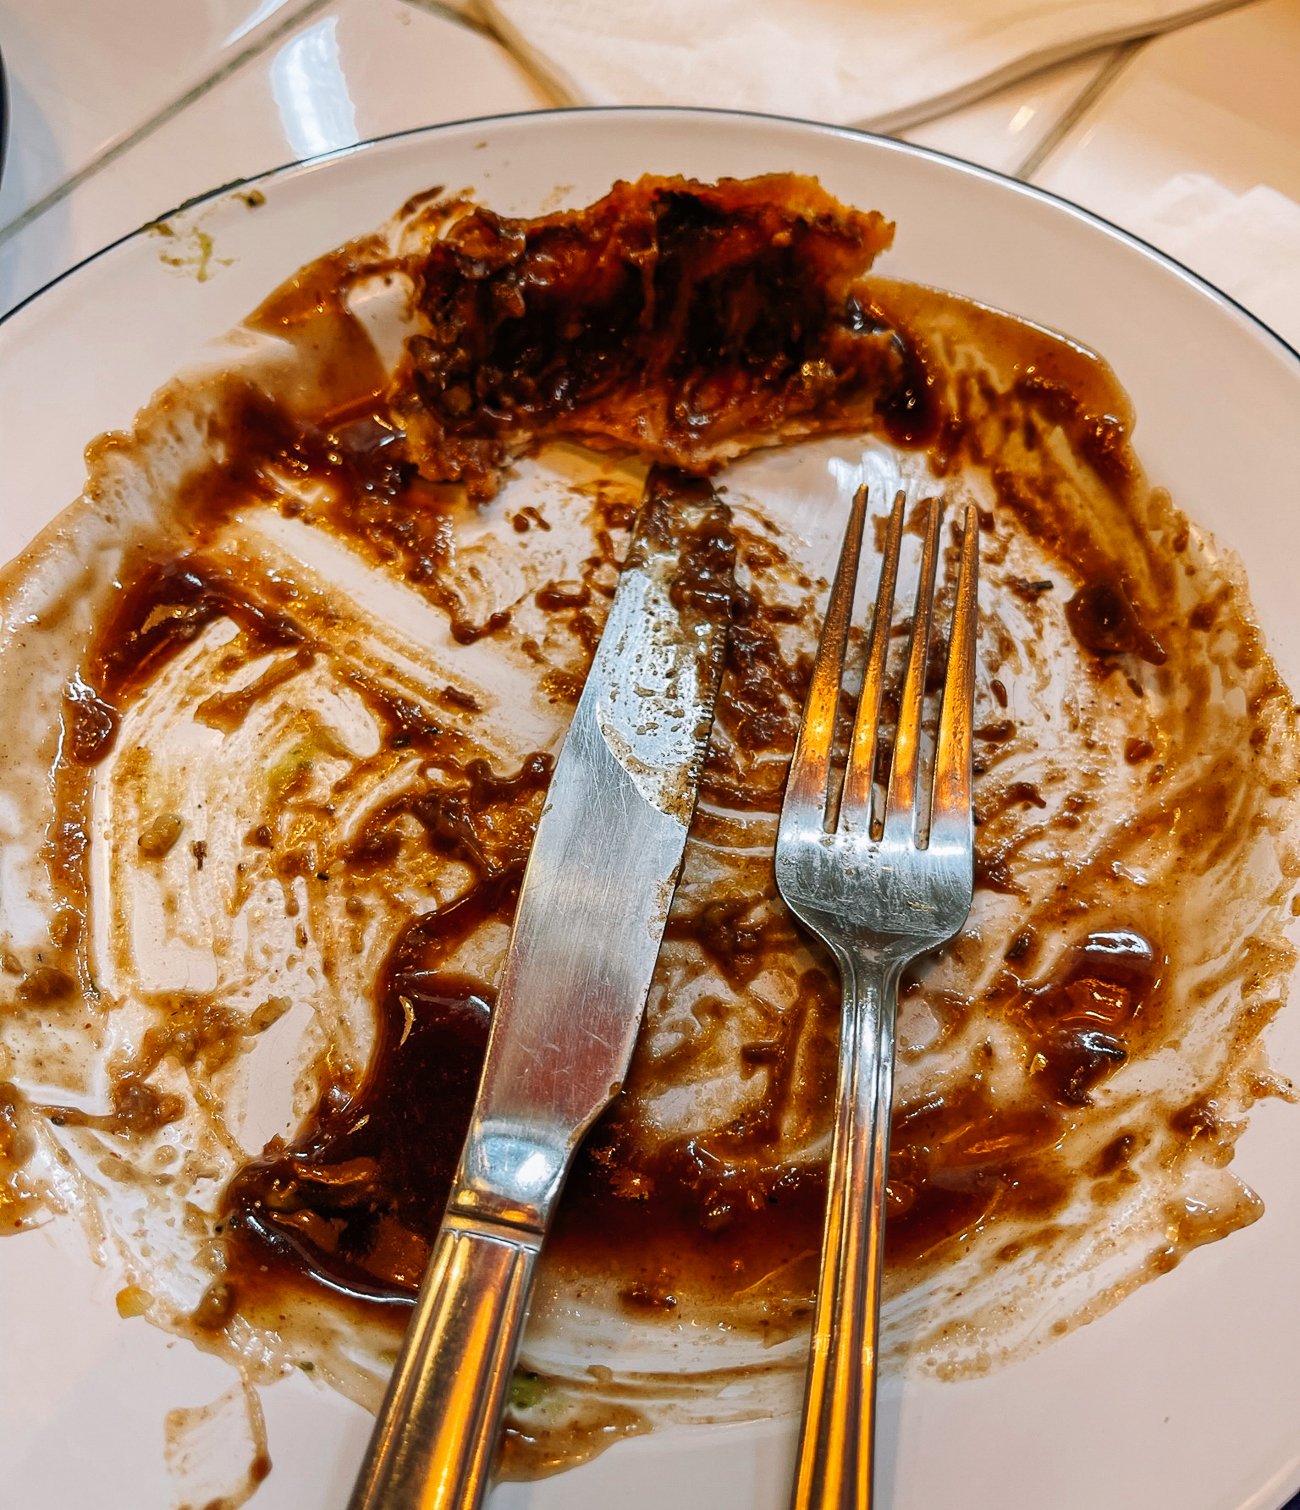 Empty plate with brown gravy